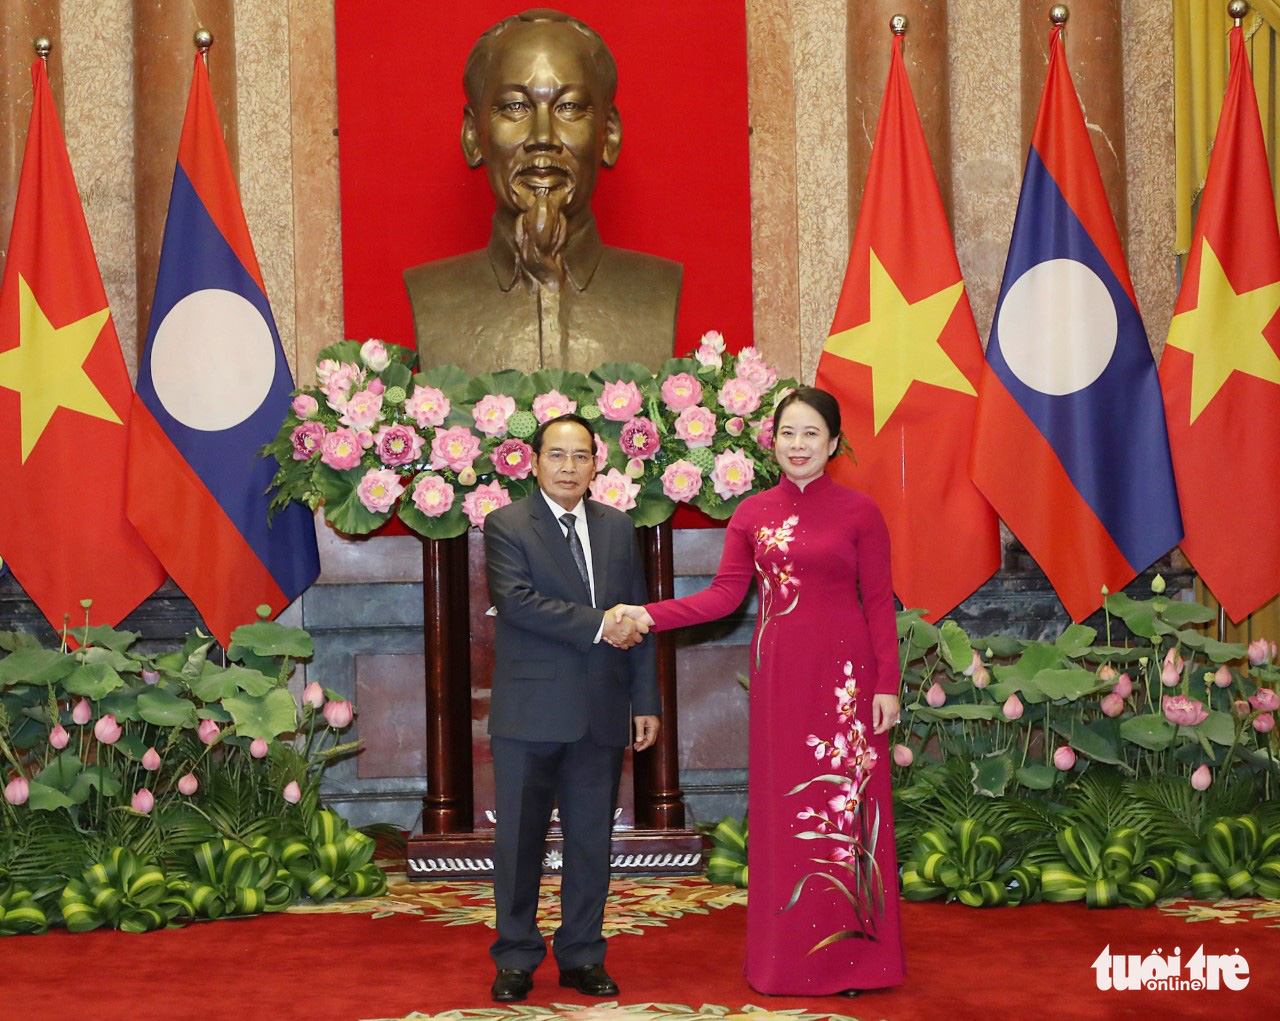 Vietnamese Vice-State President Vo Thi Anh Xuan (R) shakes hands with Lao Vice President Bounthong Chitmany in Hanoi, July 17, 2022. Photo: Danh Khang / Tuoi Tre